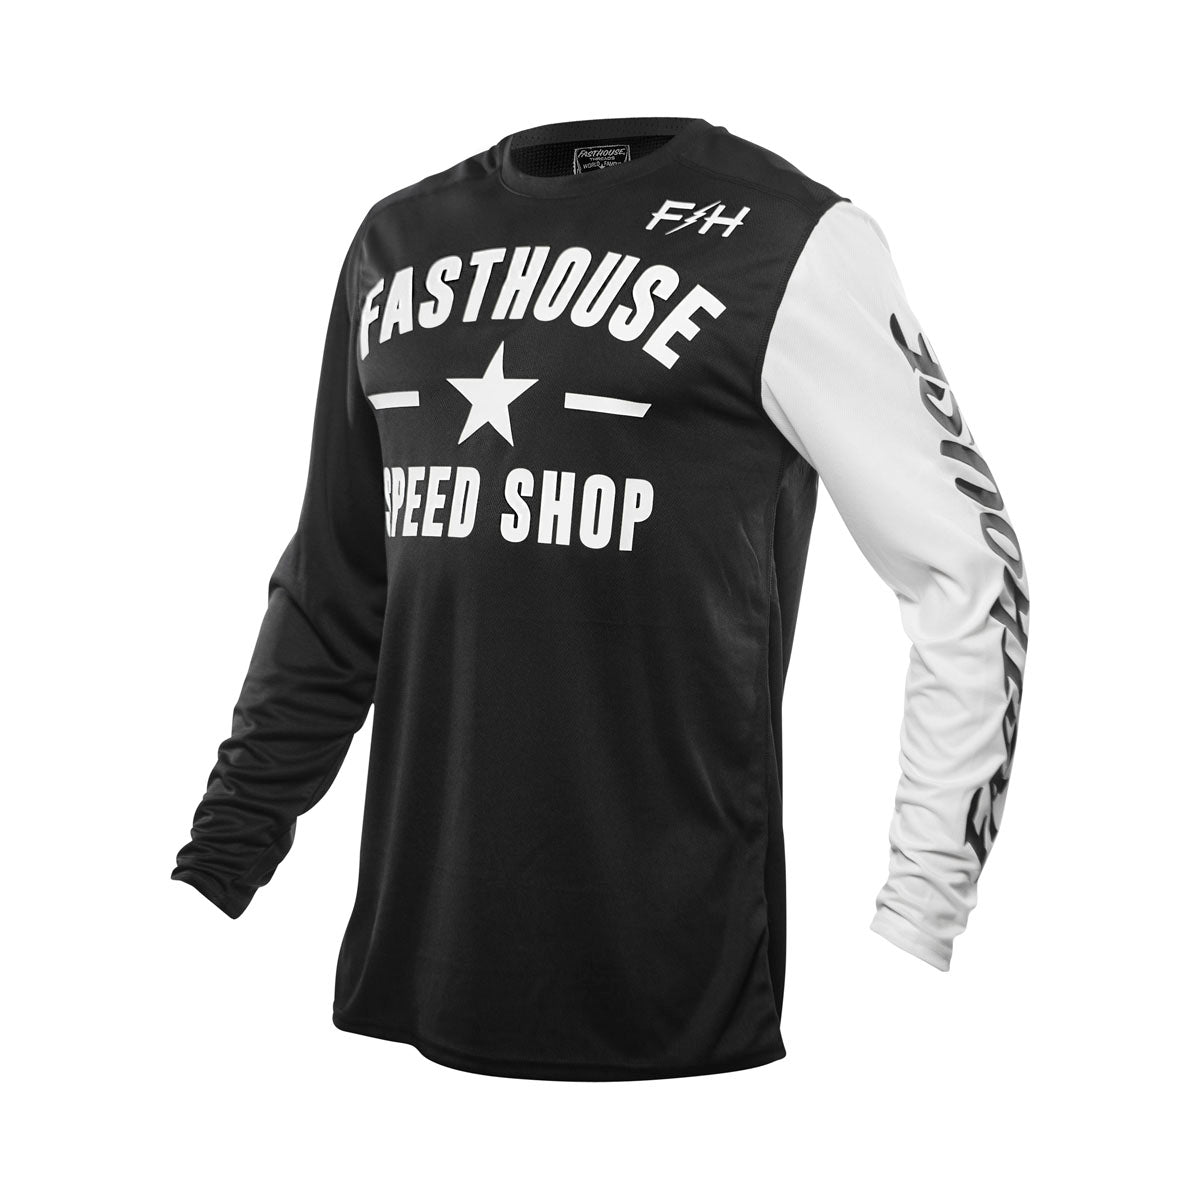 Fasthouse Youth Carbon Jersey - Black/White